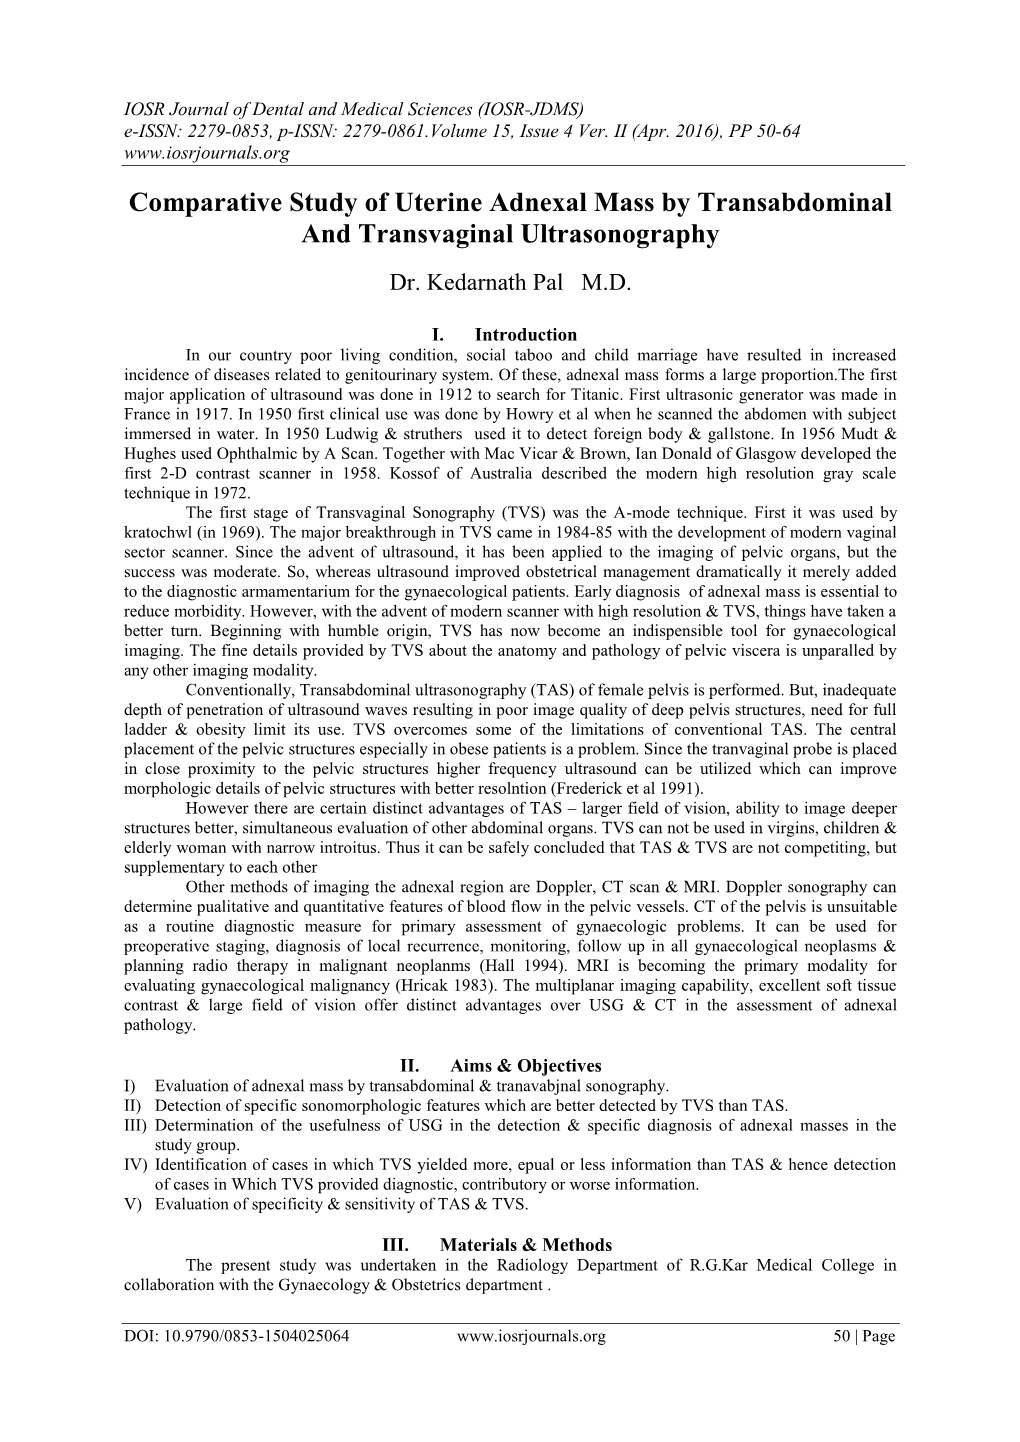 Comparative Study of Uterine Adnexal Mass by Transabdominal and Transvaginal Ultrasonography